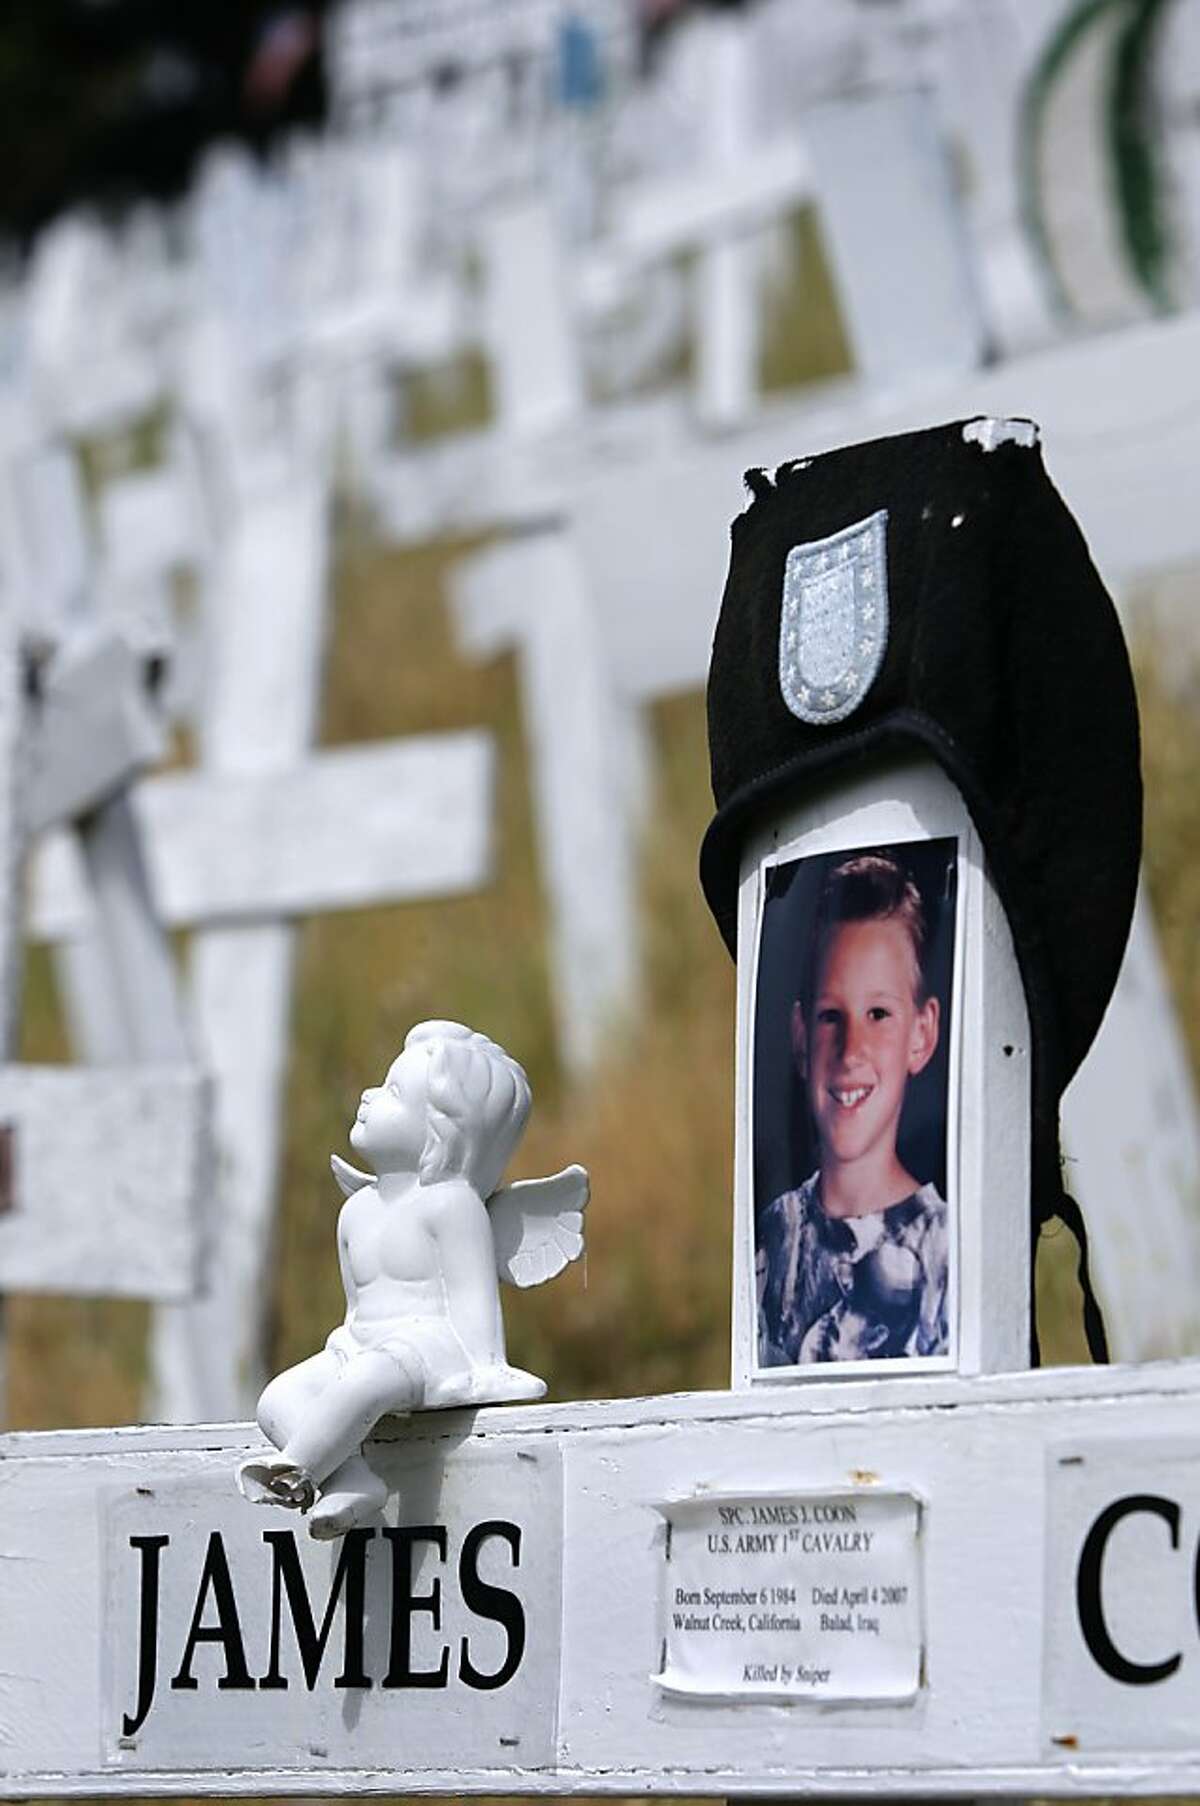 Mementos are affixed to a memorial cross on a hillside in Lafayette, Calif. on Friday, March 15, 2013. Survivors of some soldiers have adopted a cross in memory of their loved one. Anti-war activists erected the monument in late 2006 as a tribute to soldiers who died in the Iraq and Afghanistan wars. Tuesday marks the 10th anniversary of the war in Iraq.